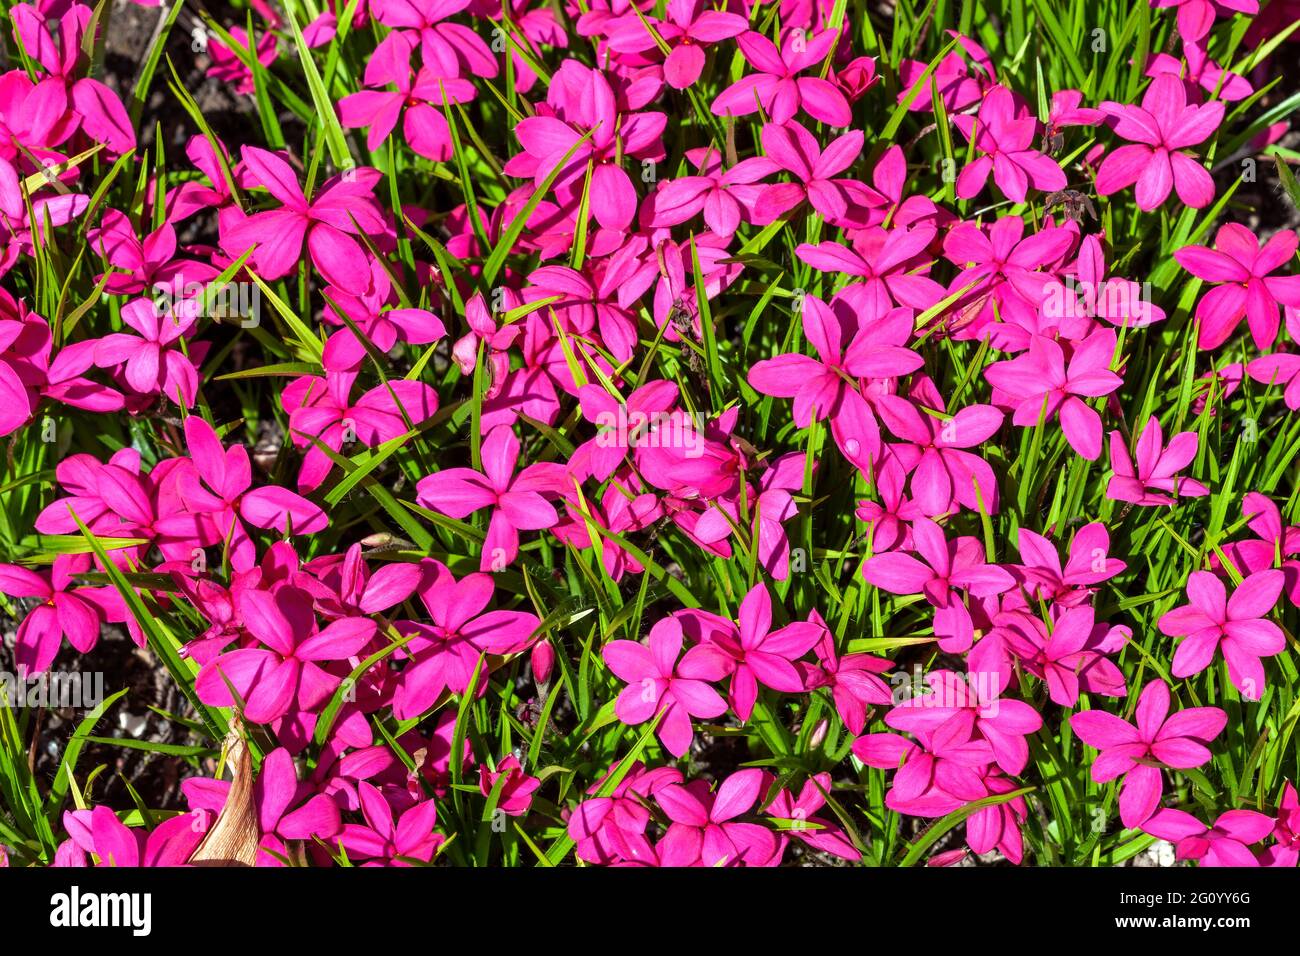 Rhodohypoxis milloides 'Claret' a flowering bulbous plant with a pink red springtime flower commonly known as spring starflower, stock photo image Stock Photo